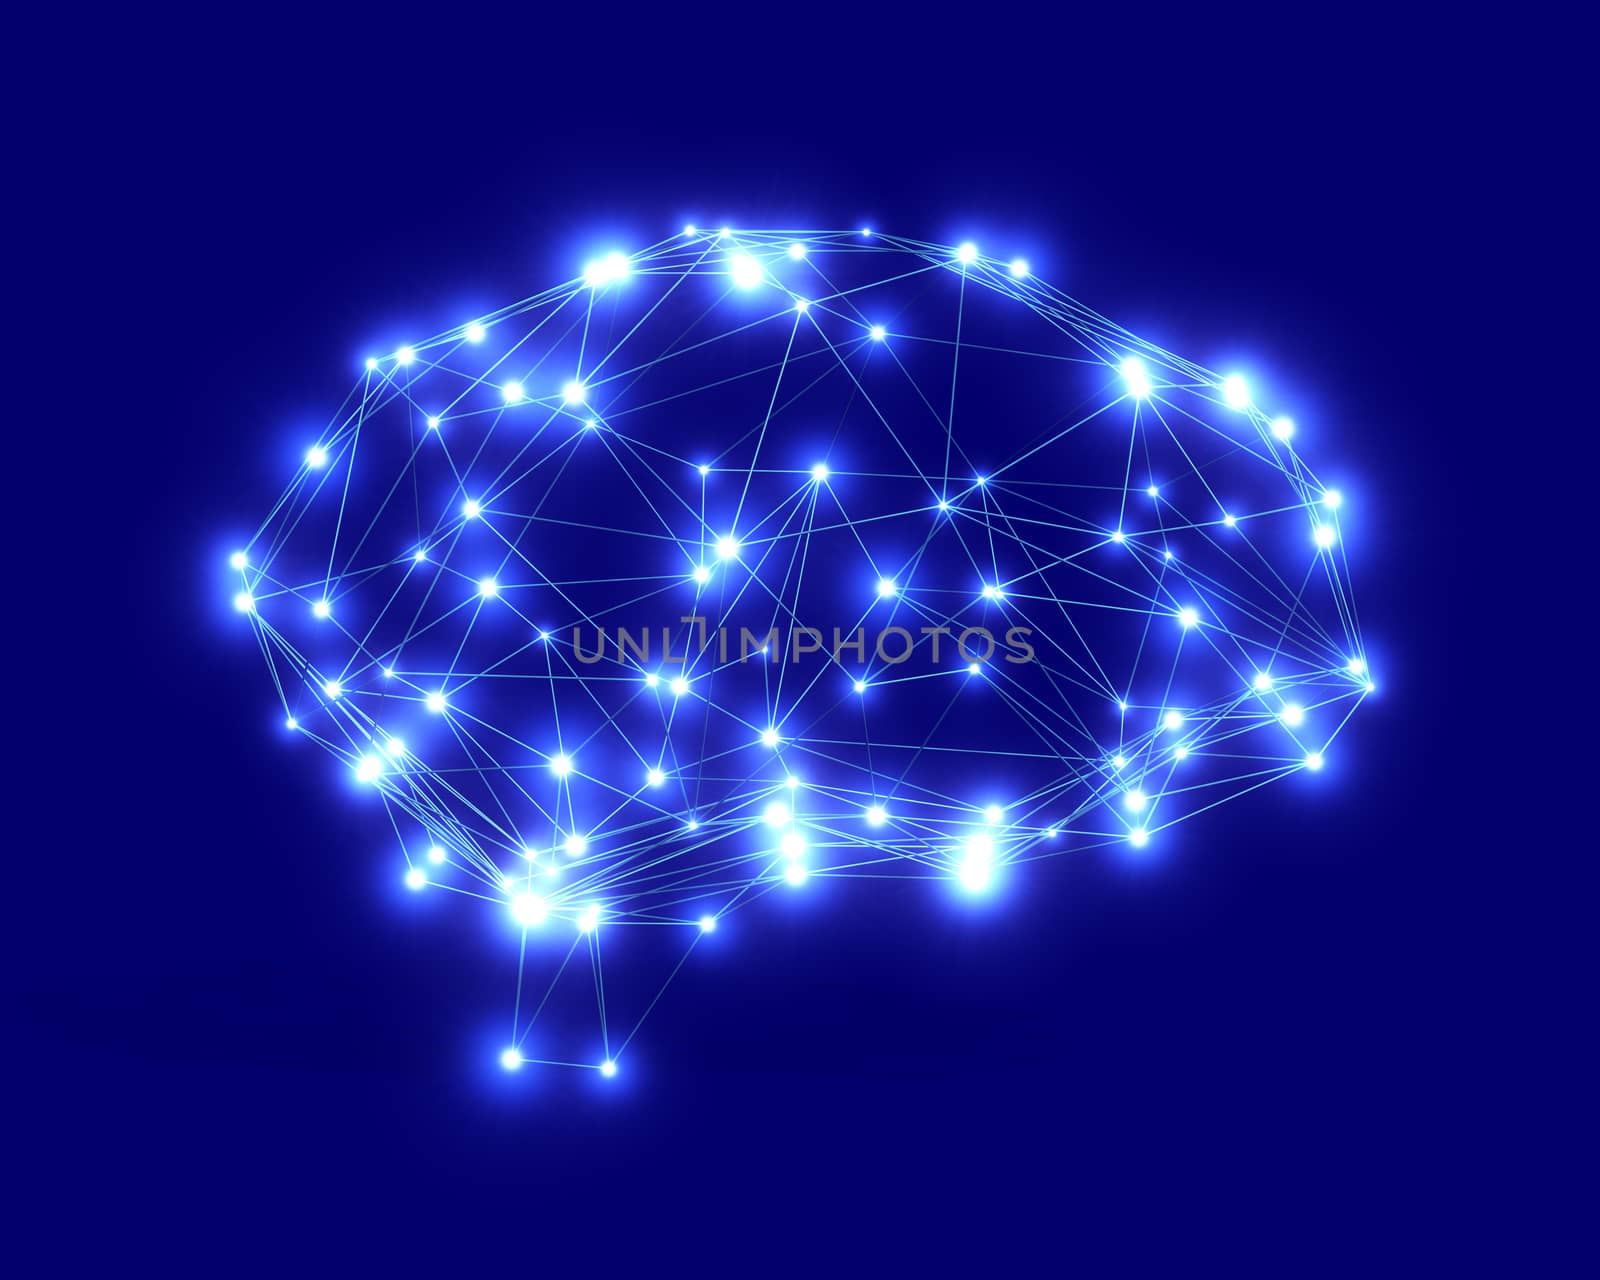 Polygonal brain shape of an artificial intelligence with lines and glowing dots and shadow over the dark blue background. 3D rendering.